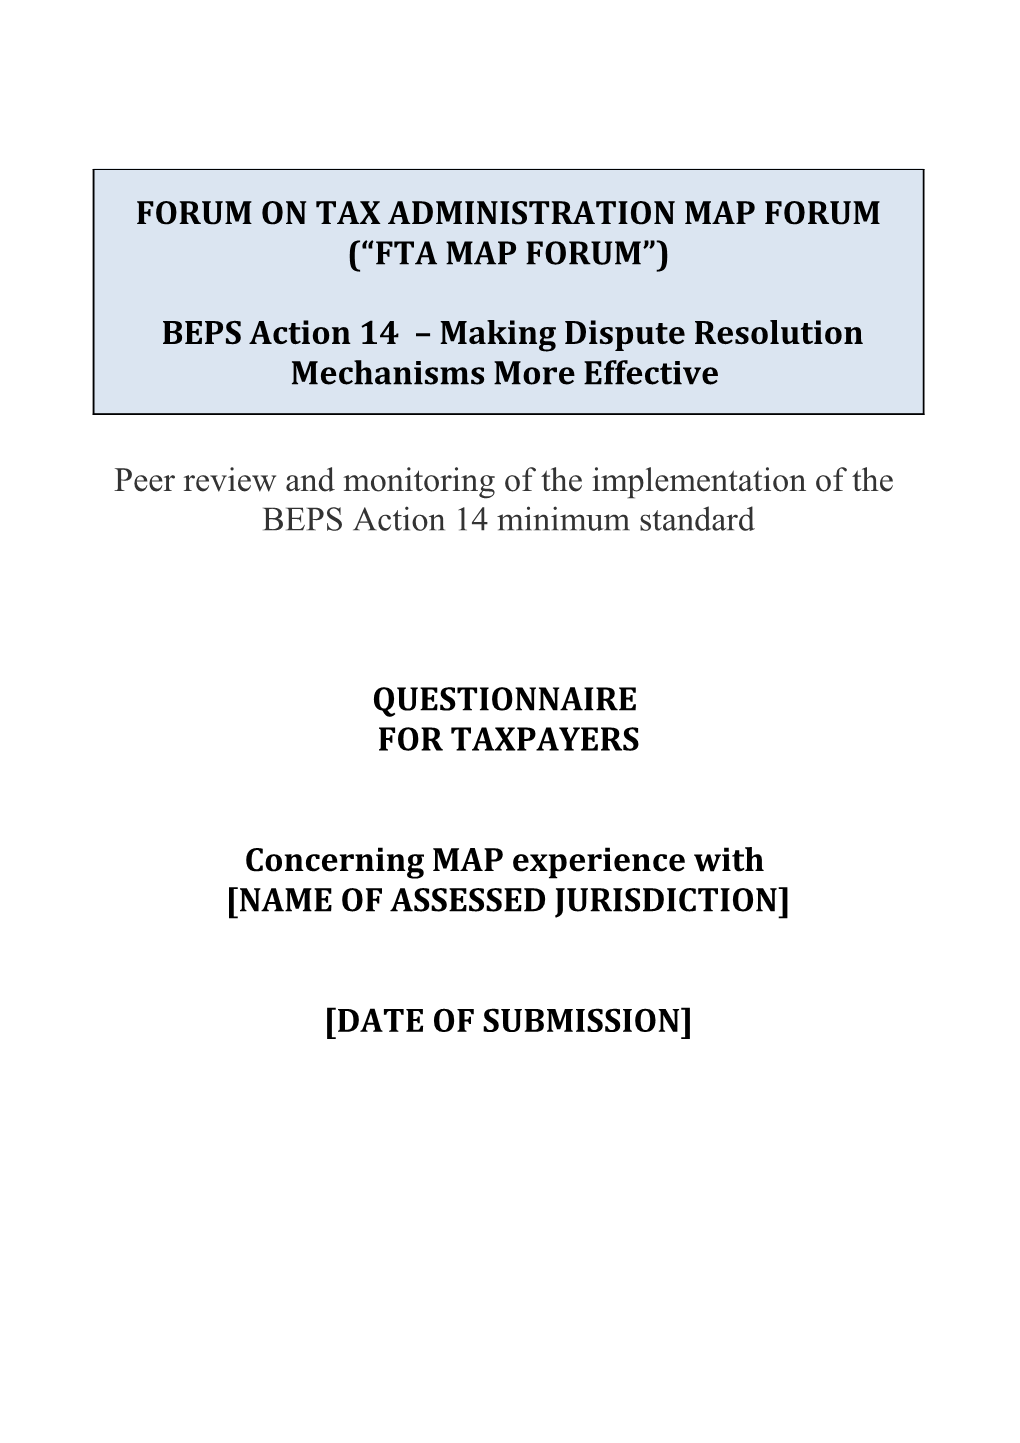 BEPS Action 14 Peer Review and Monitoring: Taxpayer Questionnaire